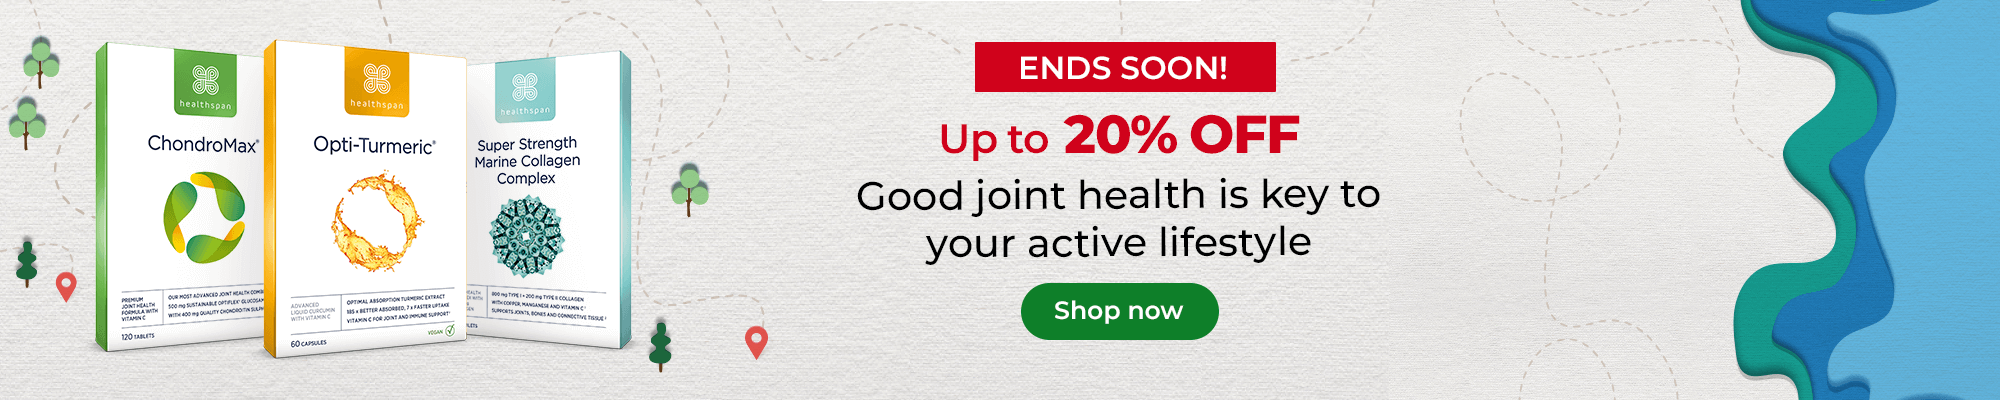 Up to 20% off. Good joint health is key to your active lifestyle. Shop now